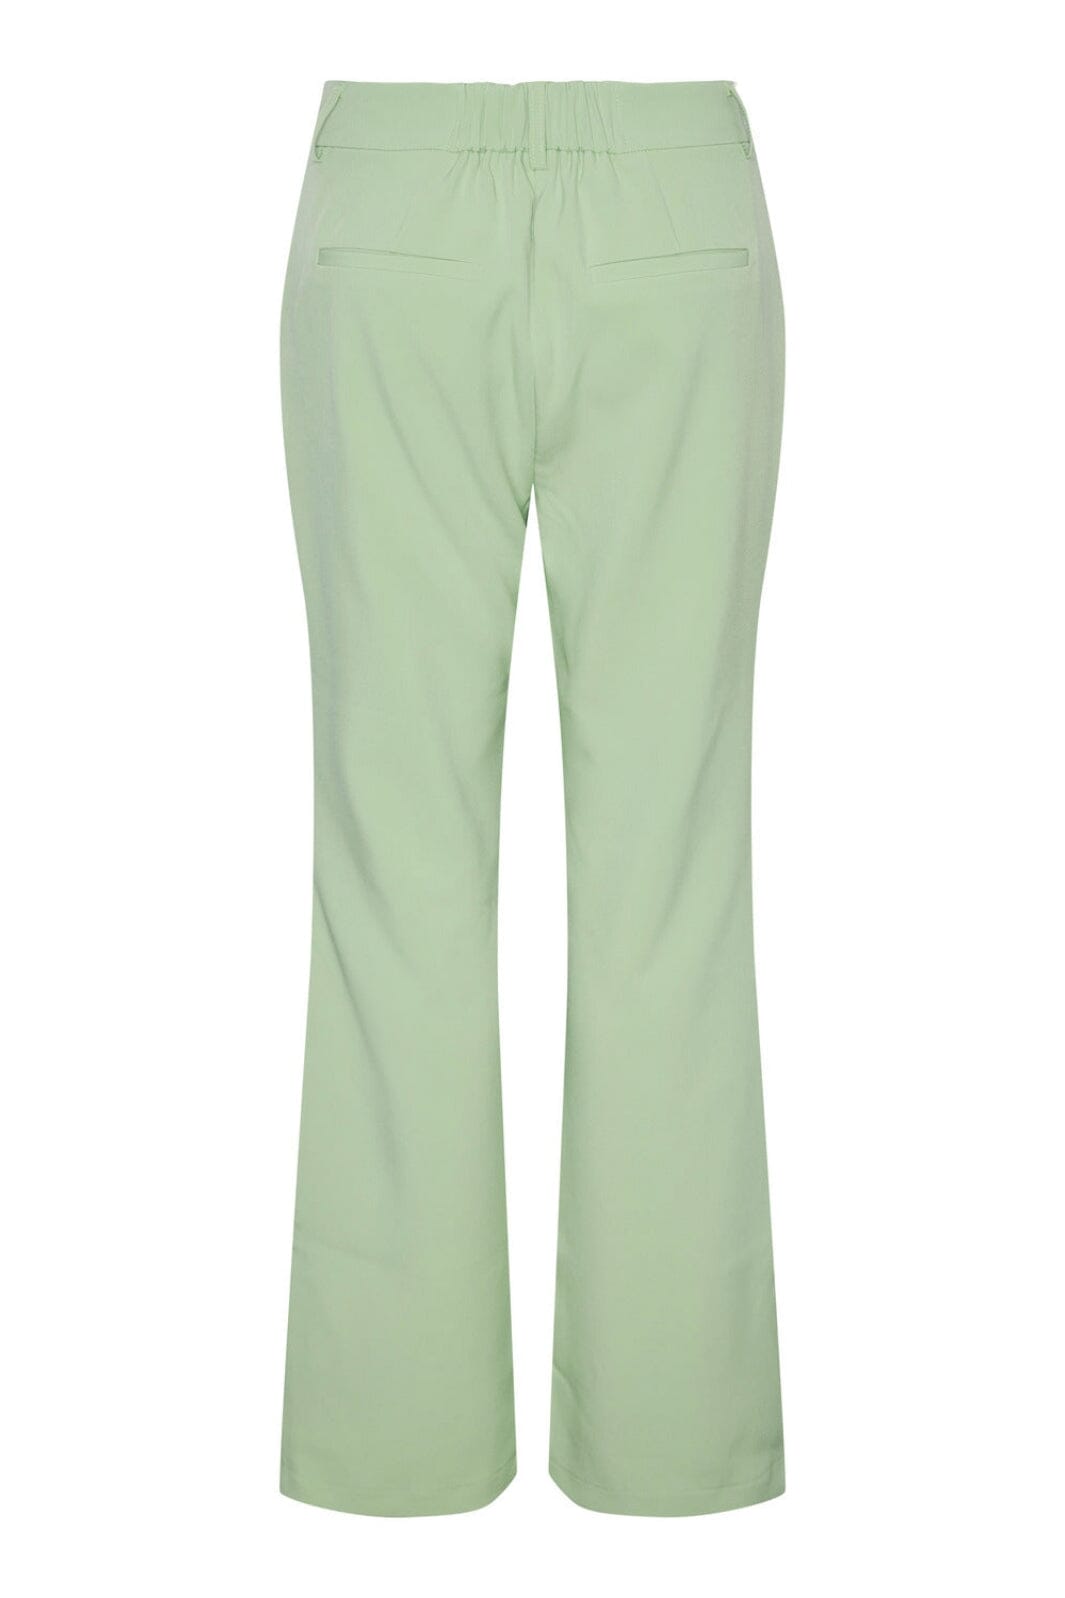 Y.A.S - Yasvala Flared Pant Show - Quiet Green Bukser 